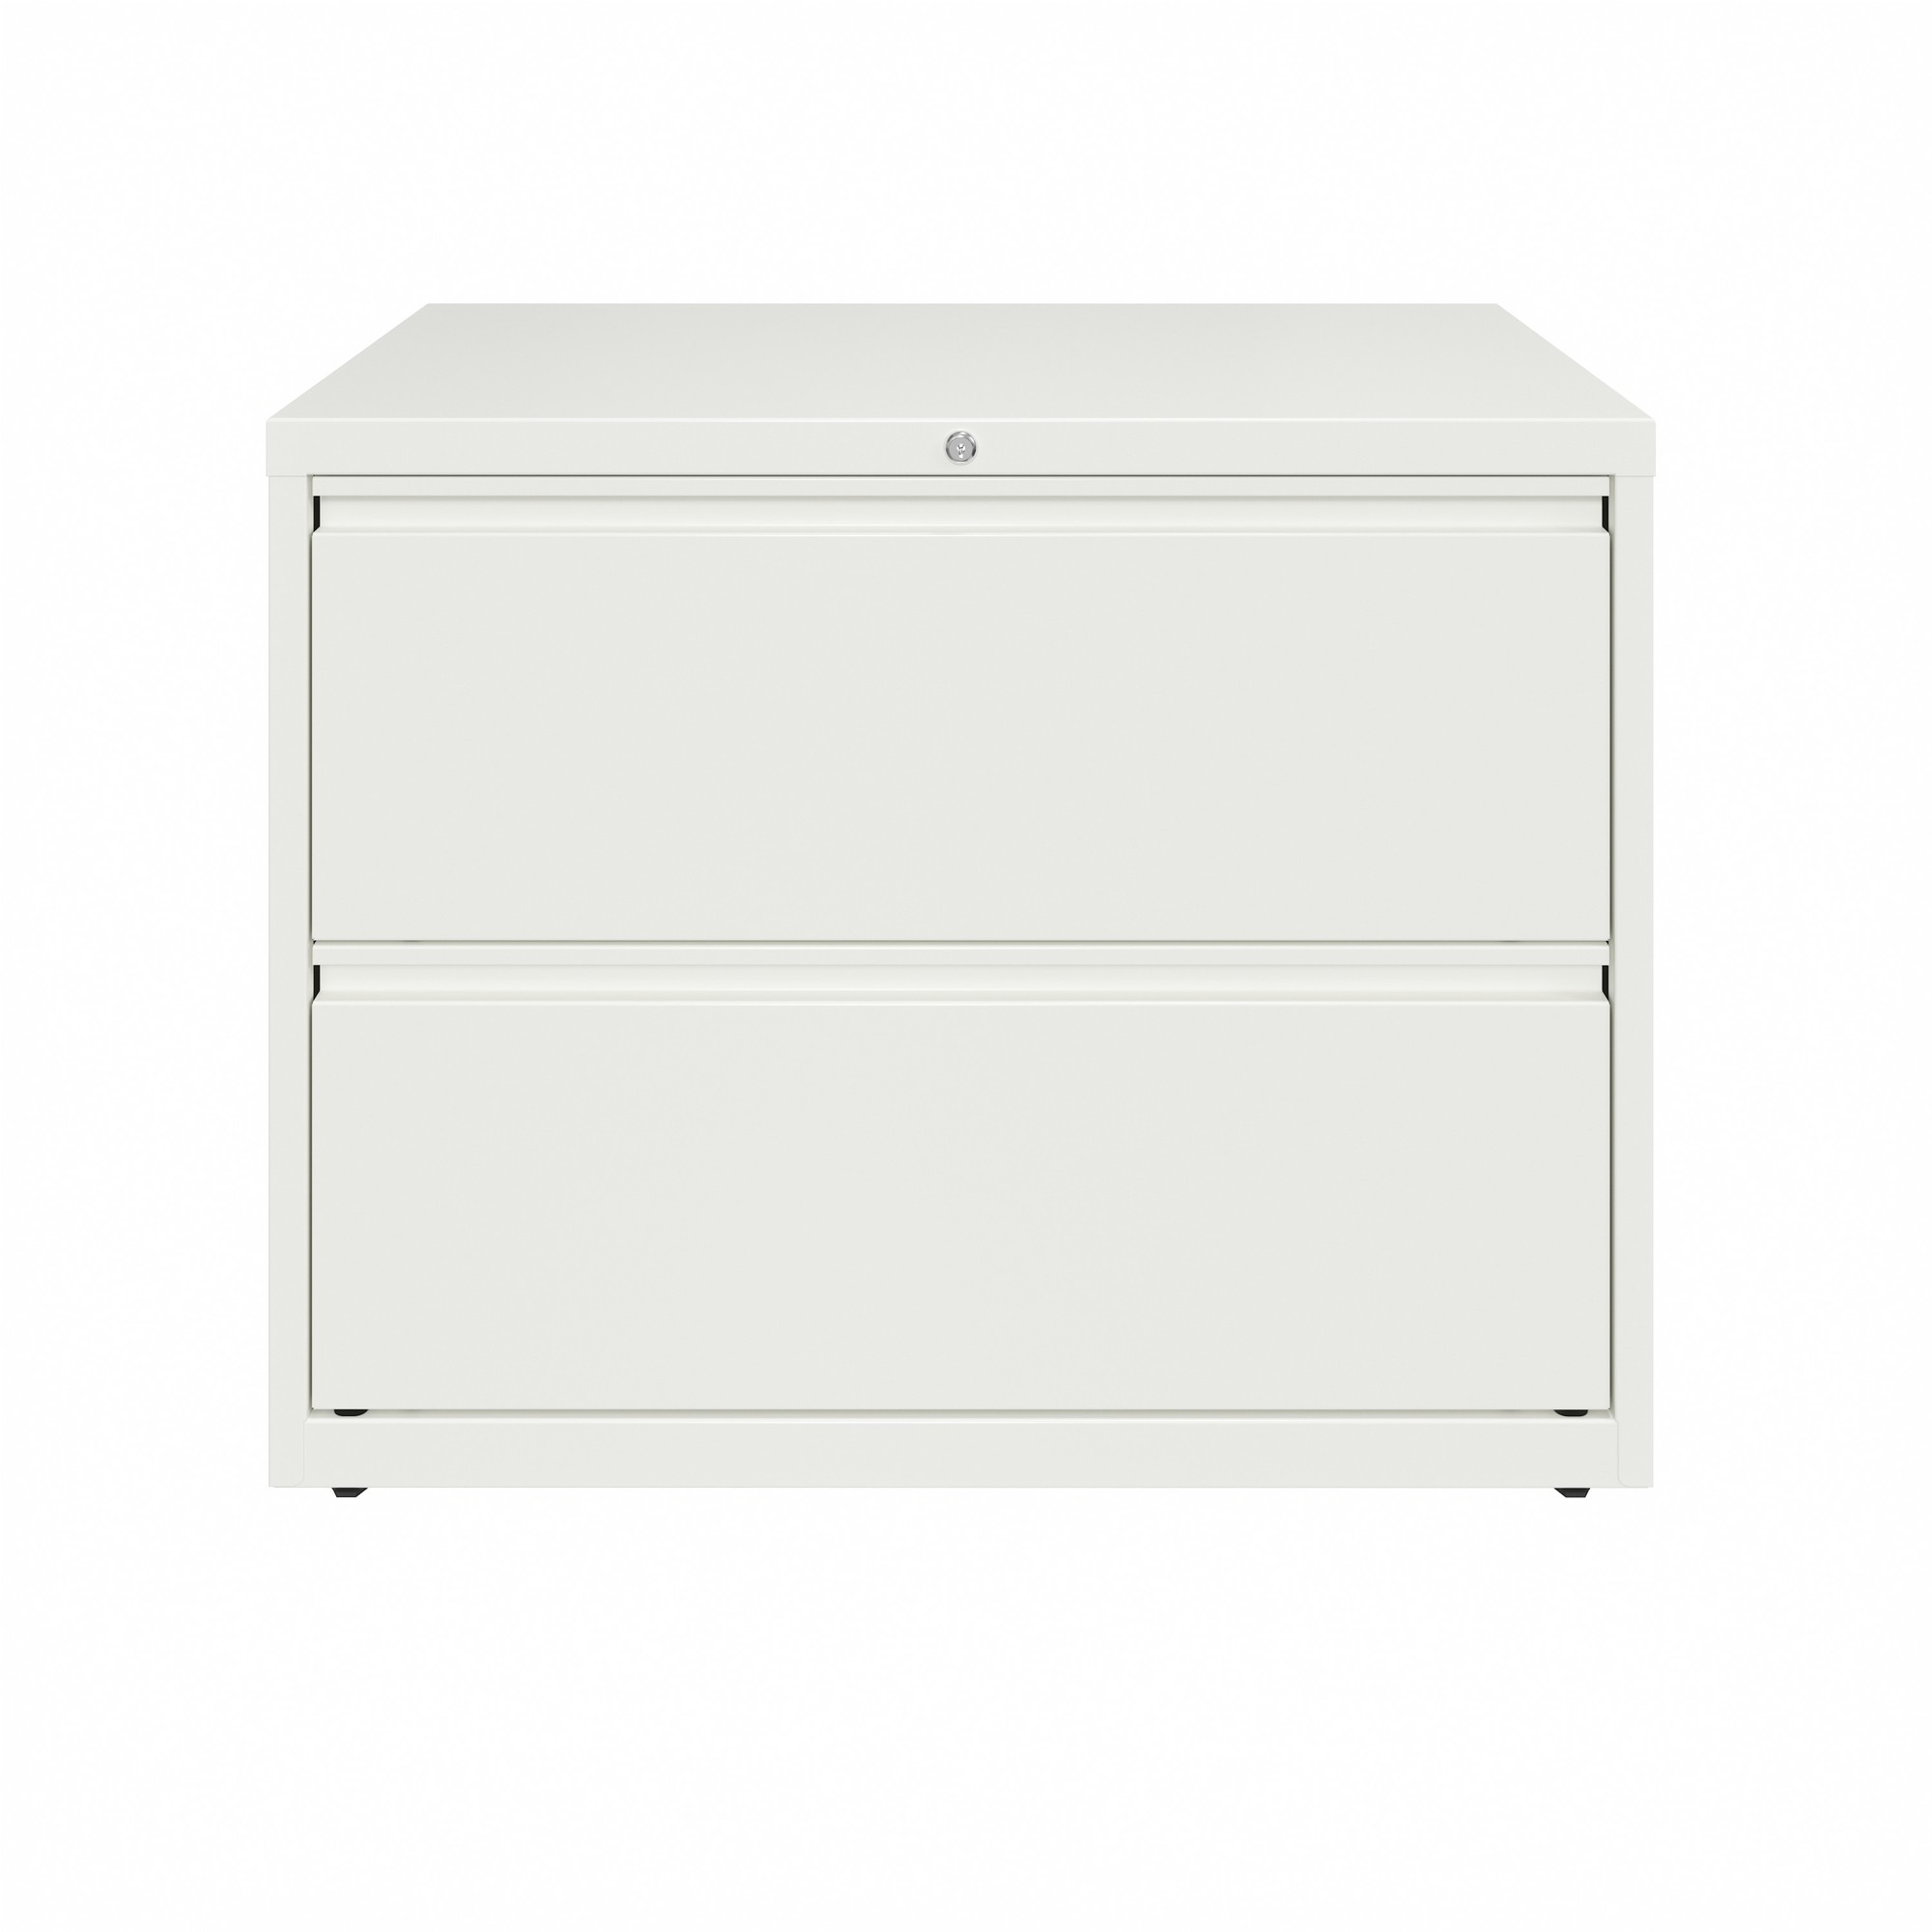 2 Drawer Lateral File Cabinet, Width 36 in, Depth 18.625 in, Height 28 in, Model - Hirsh Industries 23700